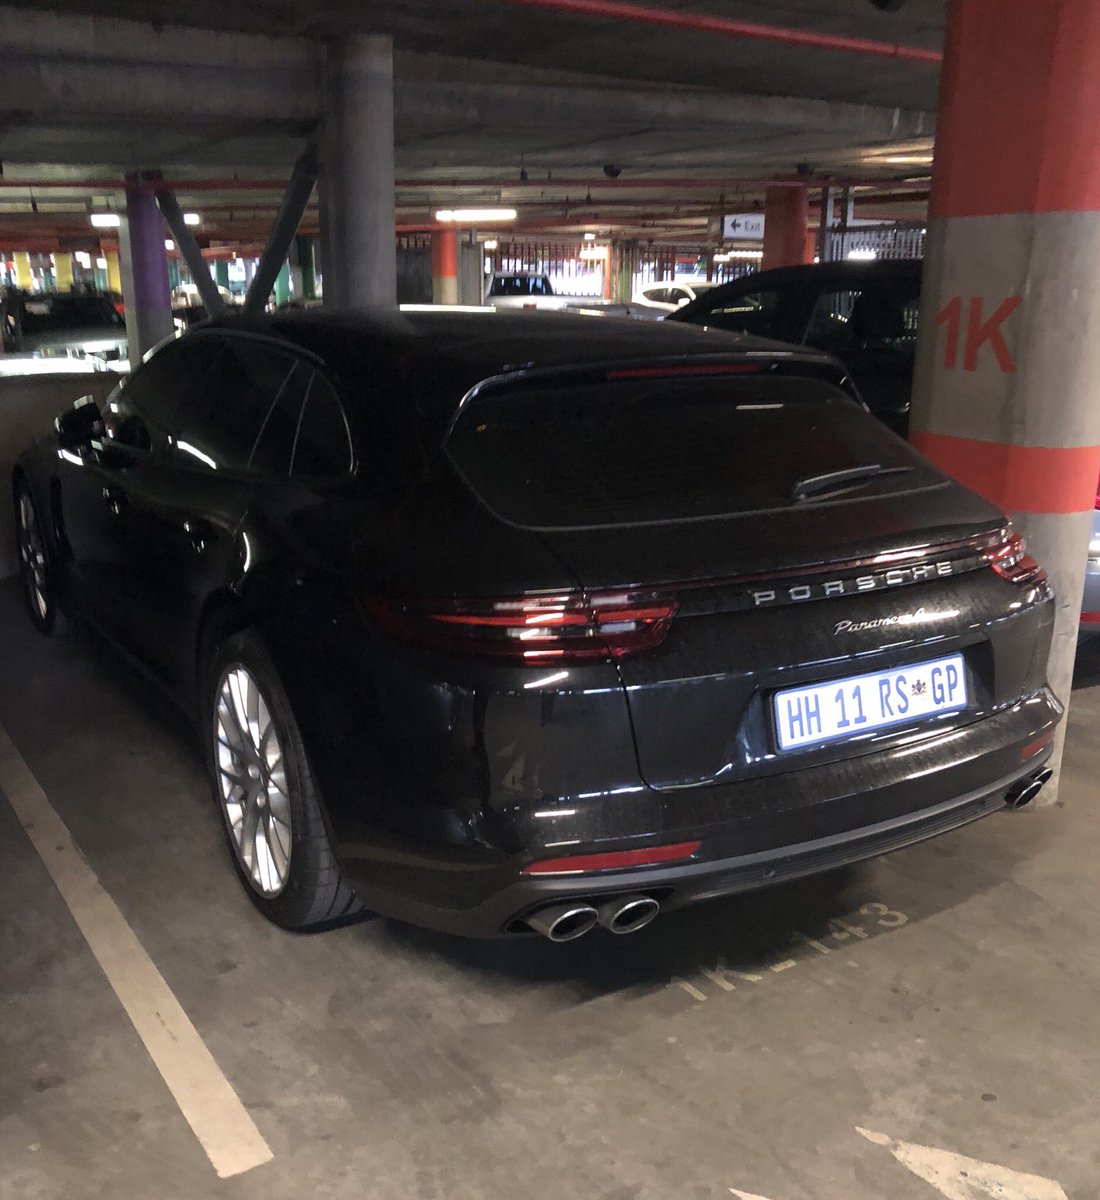 First time seeing a #Porsche #Panamera #SportTurismo. Spotted this one at OR Thambo International.